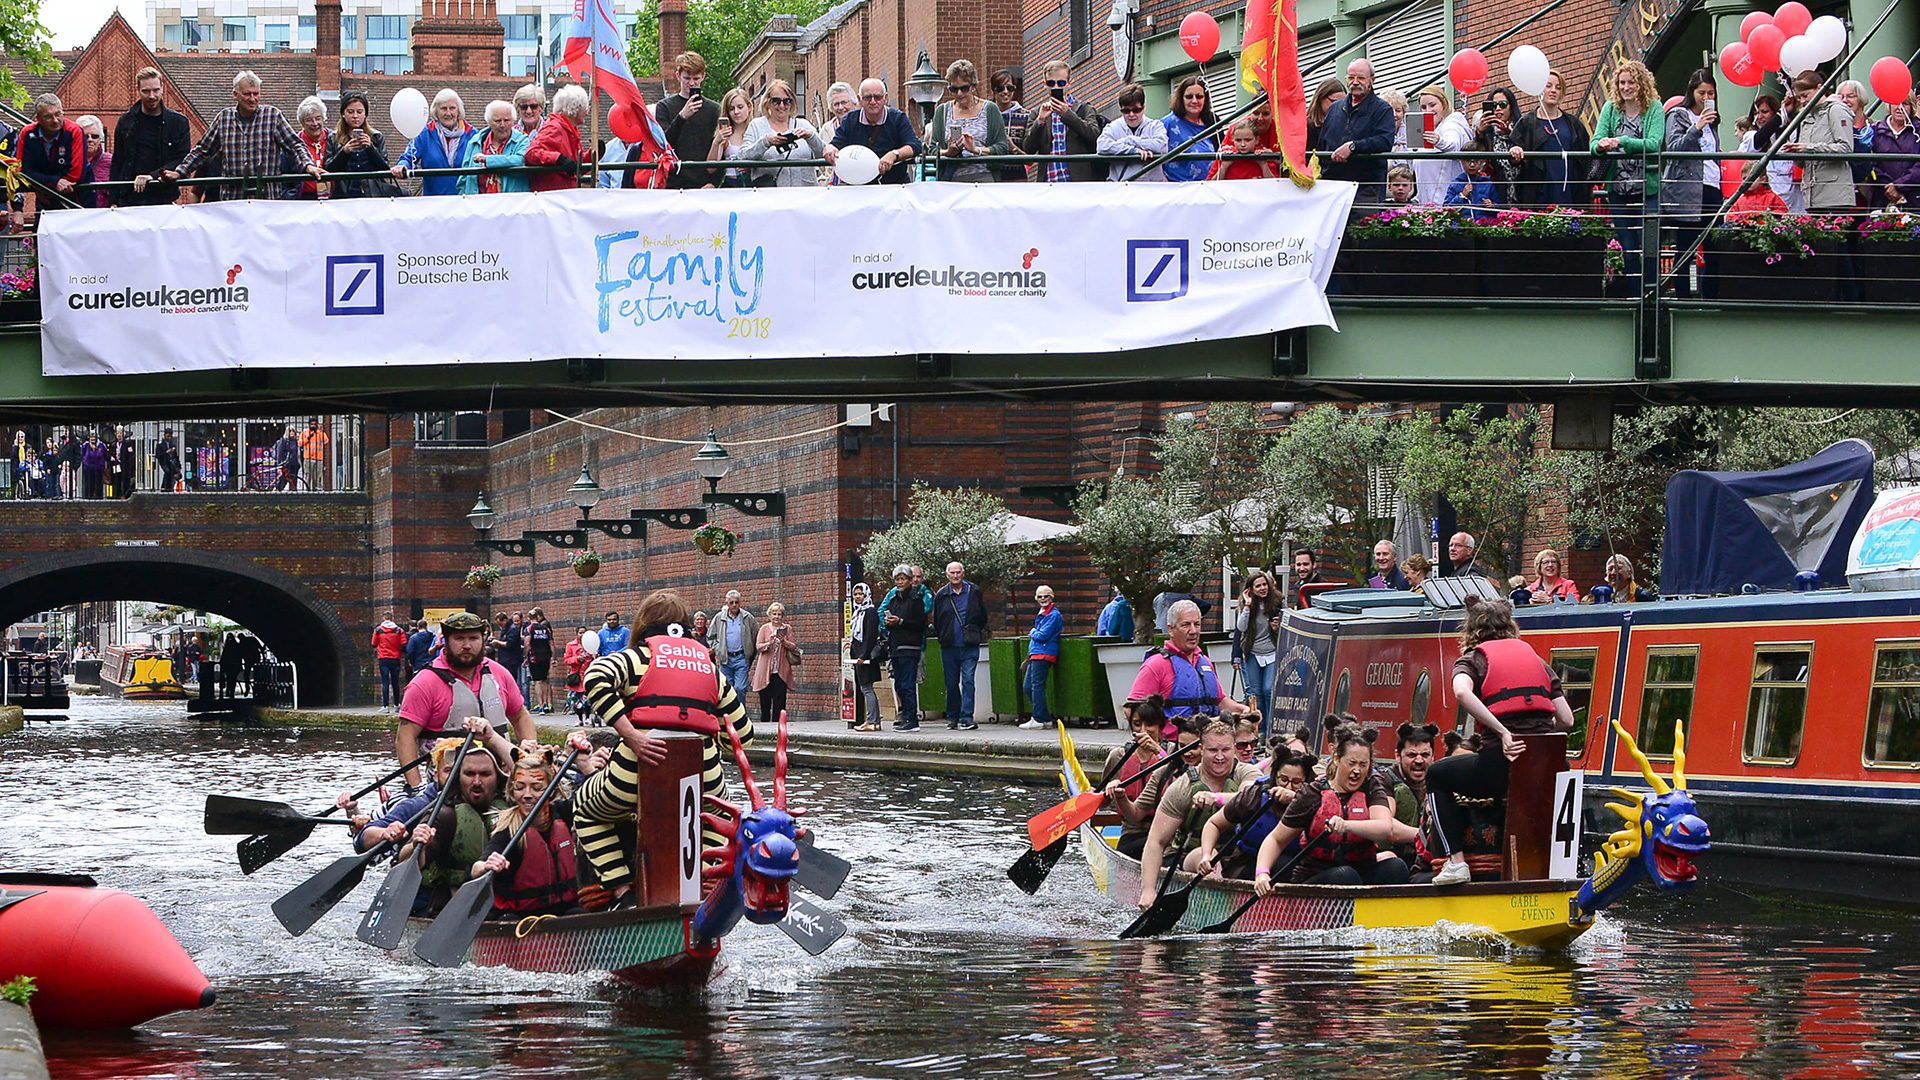 People in rowboats, rowing down a canal for a charity event in Brindleyplace, Birmingham.